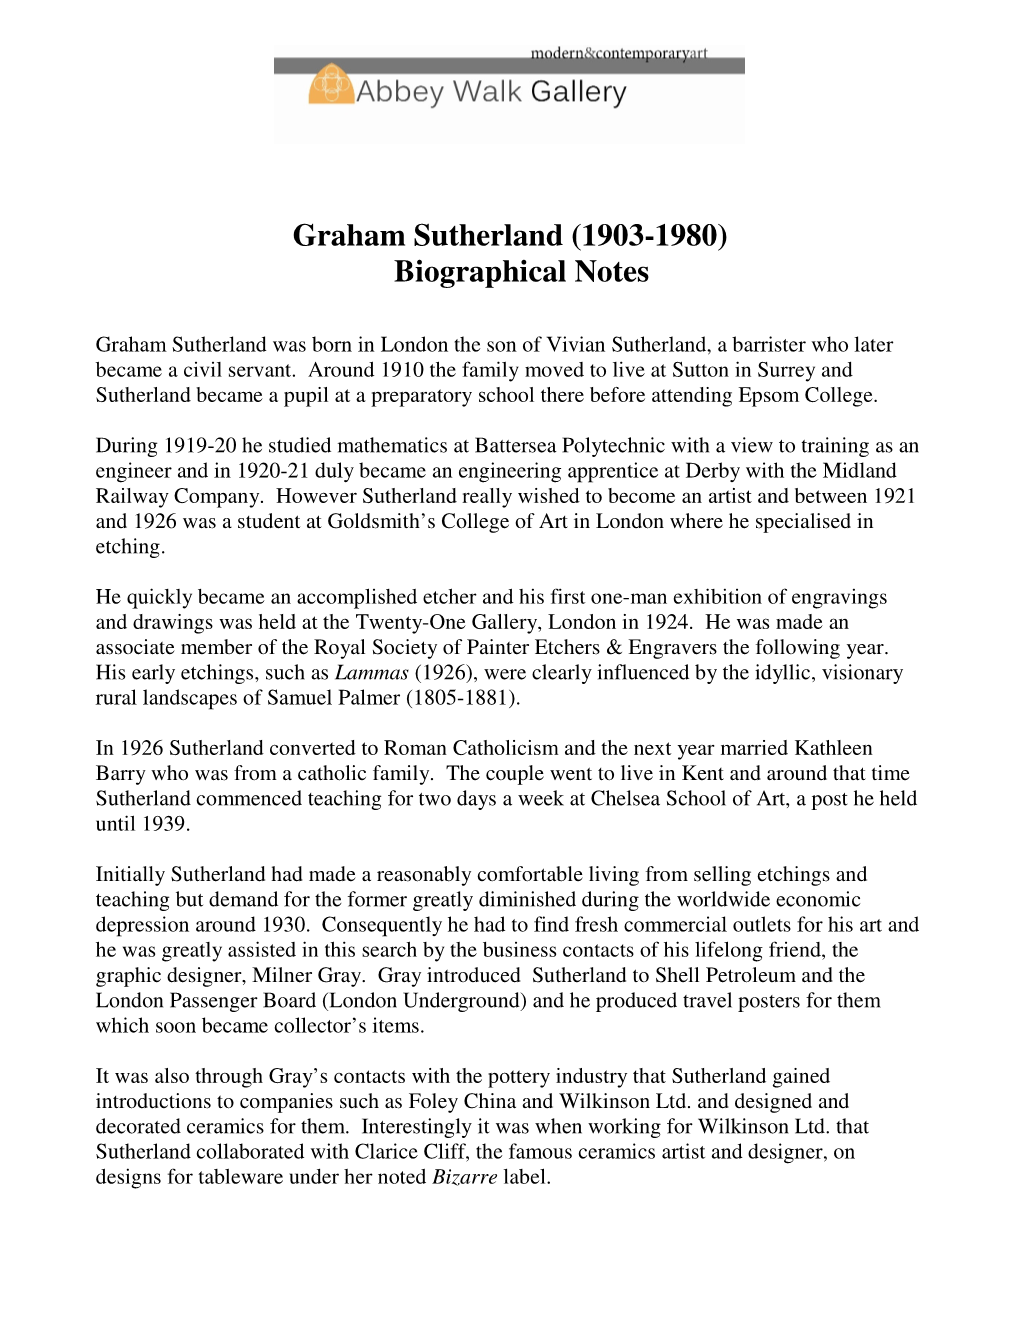 Graham Sutherland (1903-1980) Biographical Notes